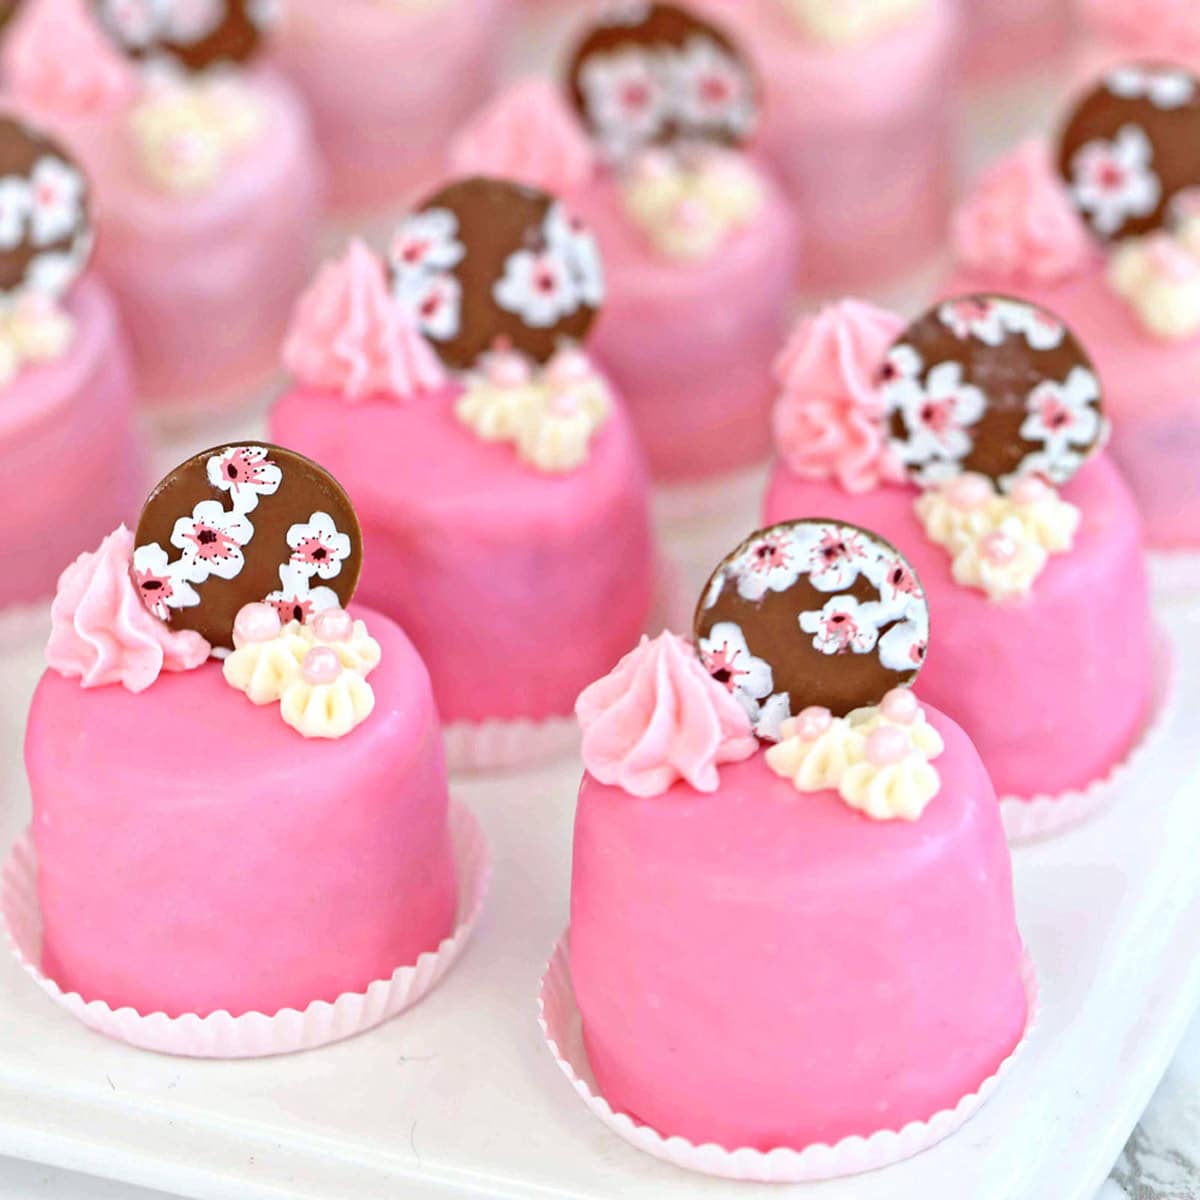 Cherry Blossom Petit Fours in small white candy cups on a white platter.